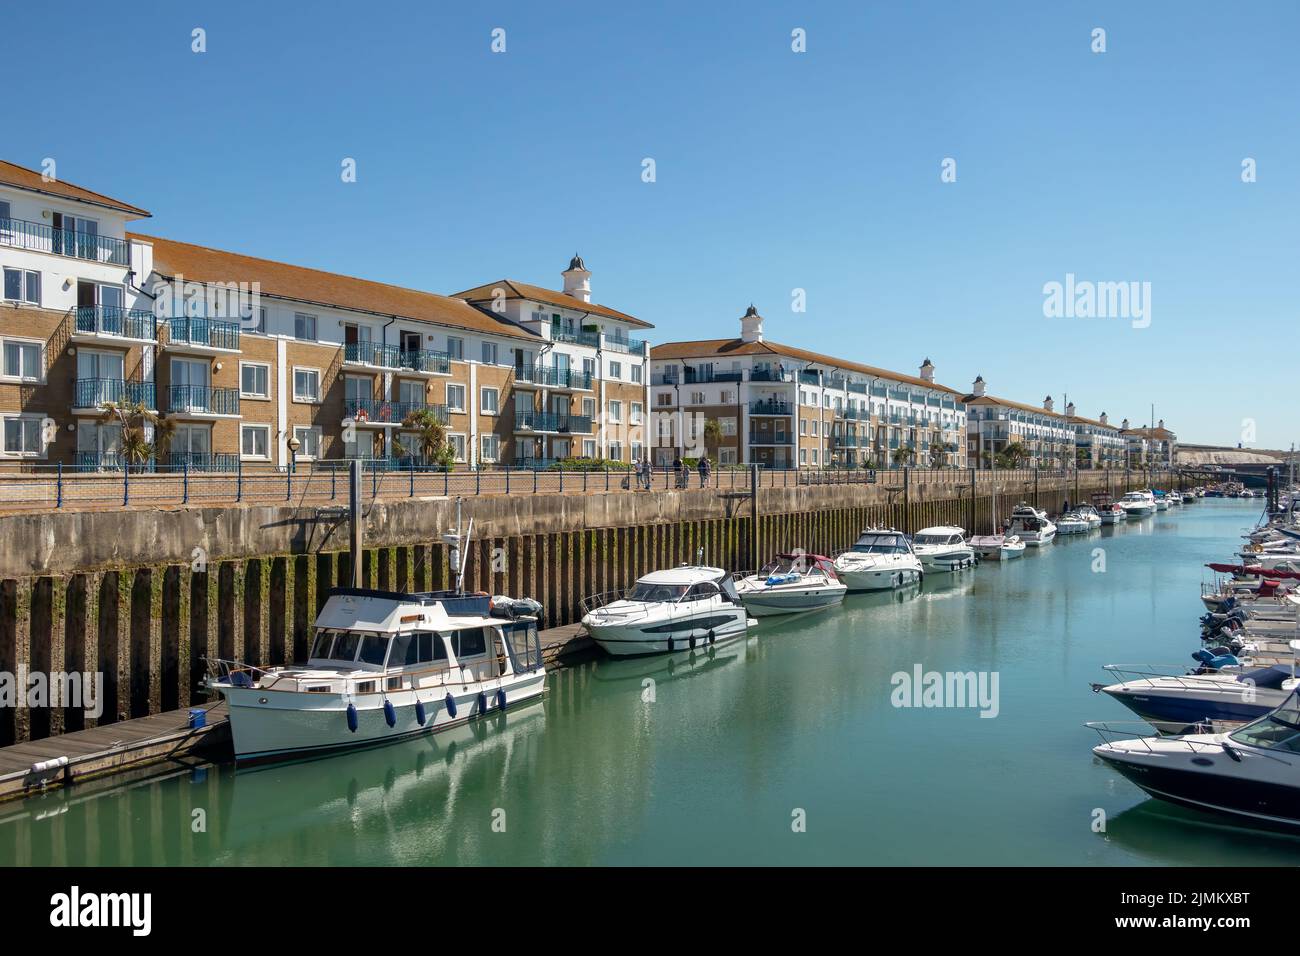 Brighton, East Sussex, UK - AUGUST 5, 2022 : View of the marina in Brighton on August 5, 2022. Unidentified people Stock Photo